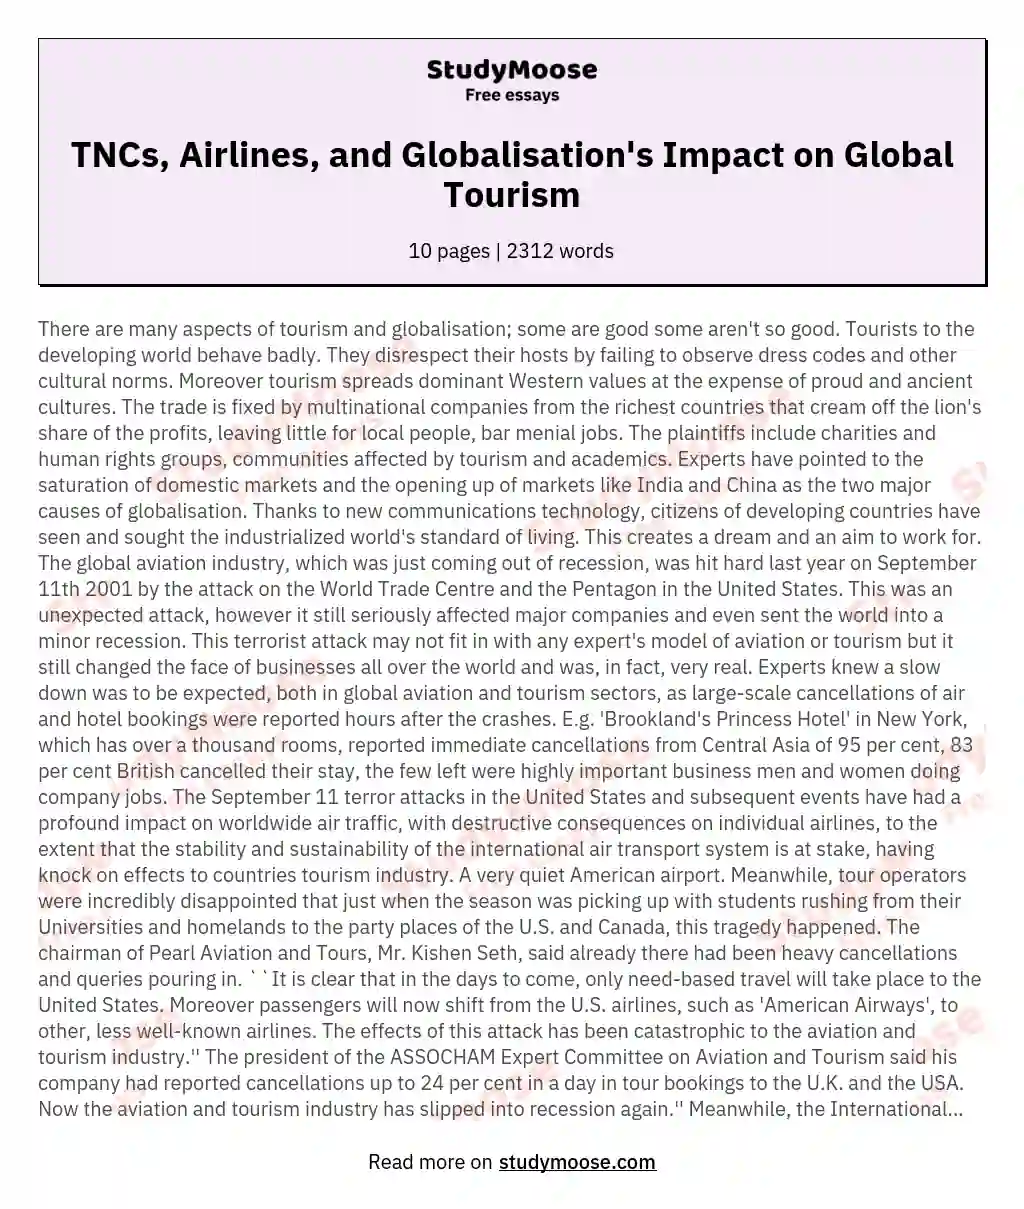 The role of multinational companies (tnc), airline companies and globalisation on the tourism industry, globally